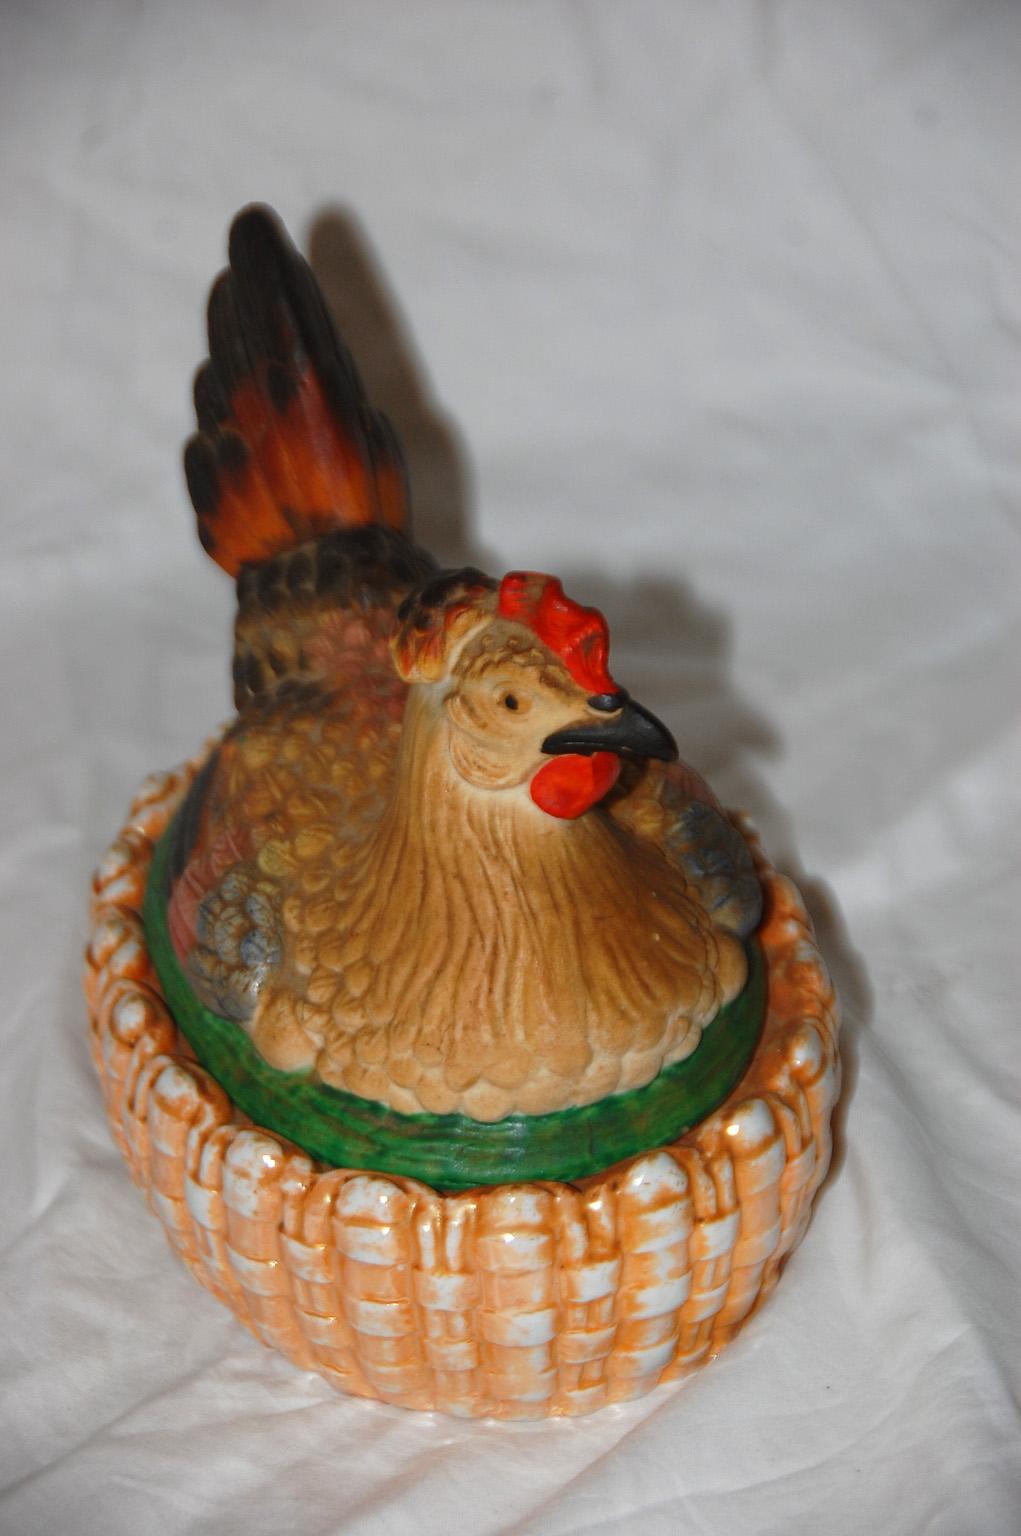 Hand-Painted English Staffordshire Chicken on a Basket from the Mid-19th Century